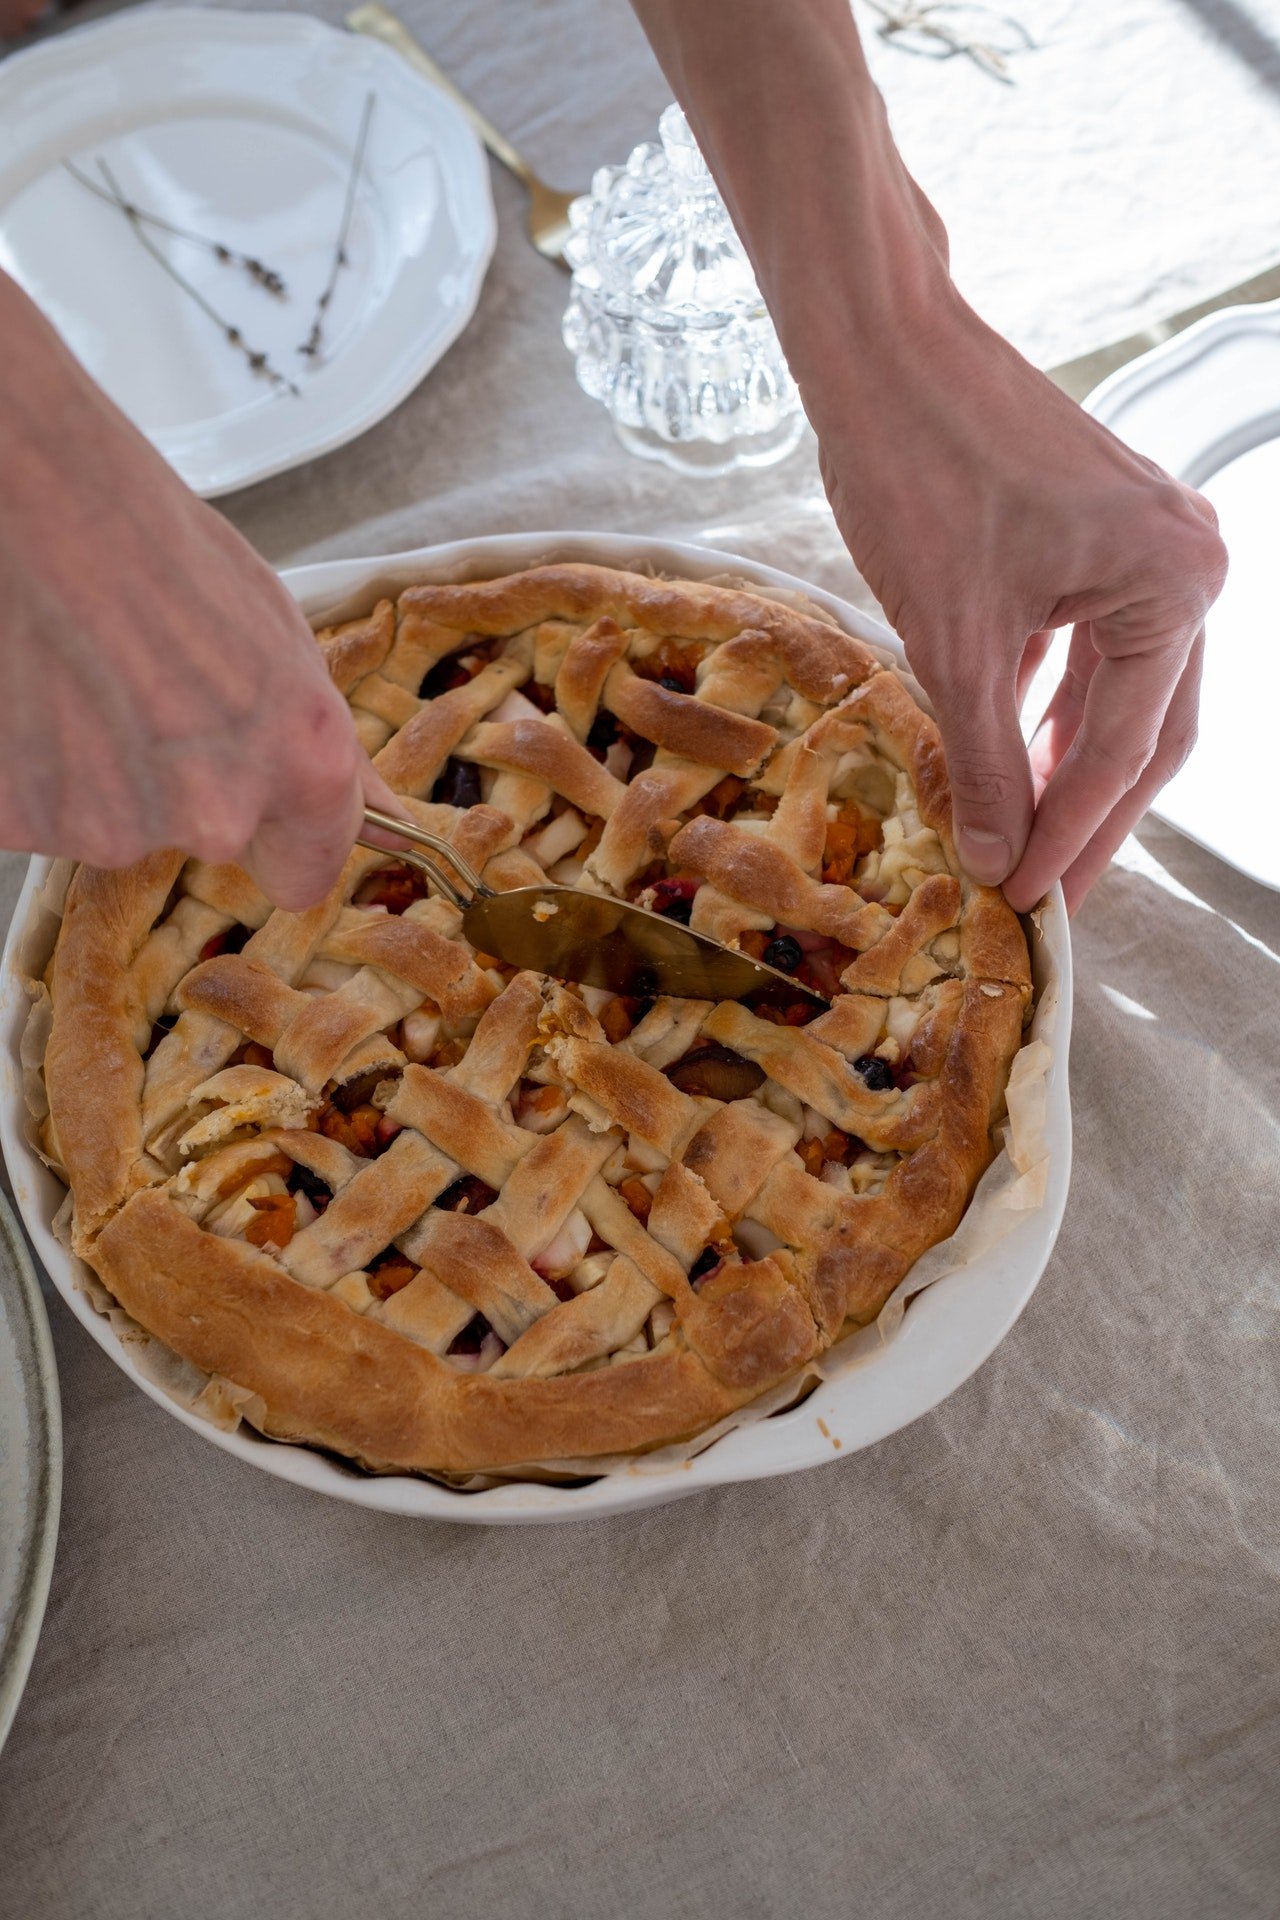 Riley came over with an apple pie, but it was an excuse to get their families together. | Source: Pexels